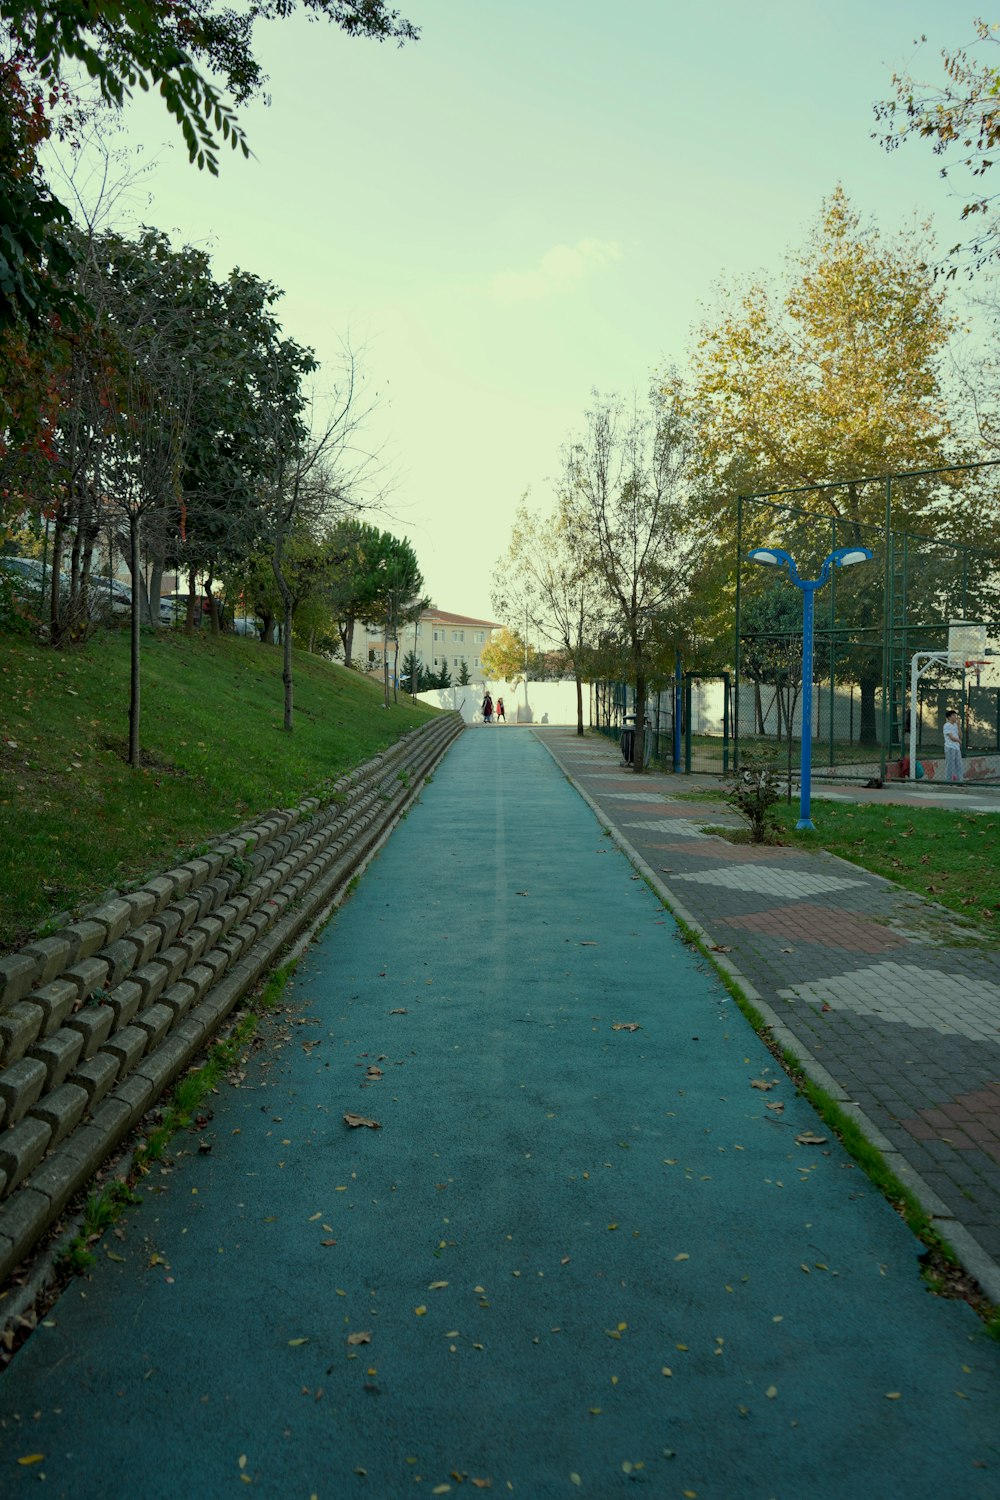 a paved road with a park in the background